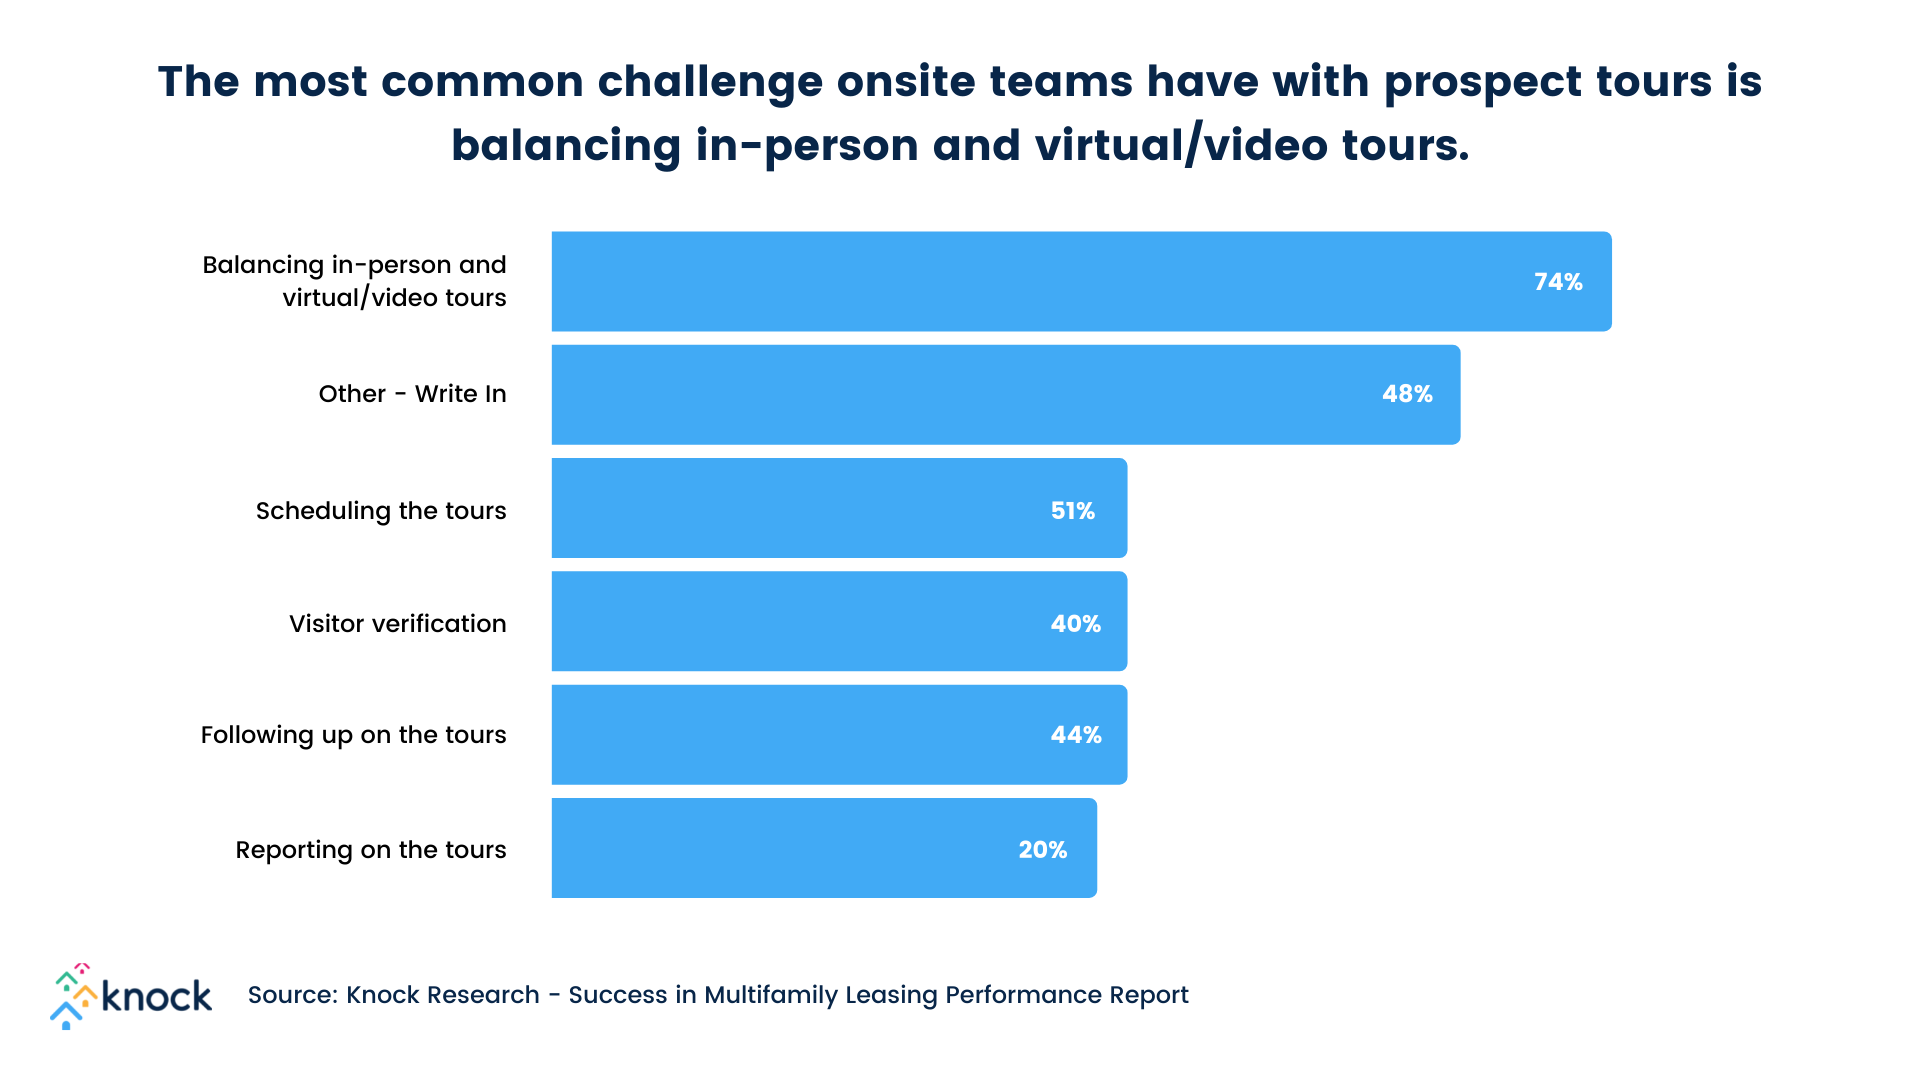 Knock's report shows: the most common challenge onsite teams have with prospect tours is balancing in-person and virtual/video tours